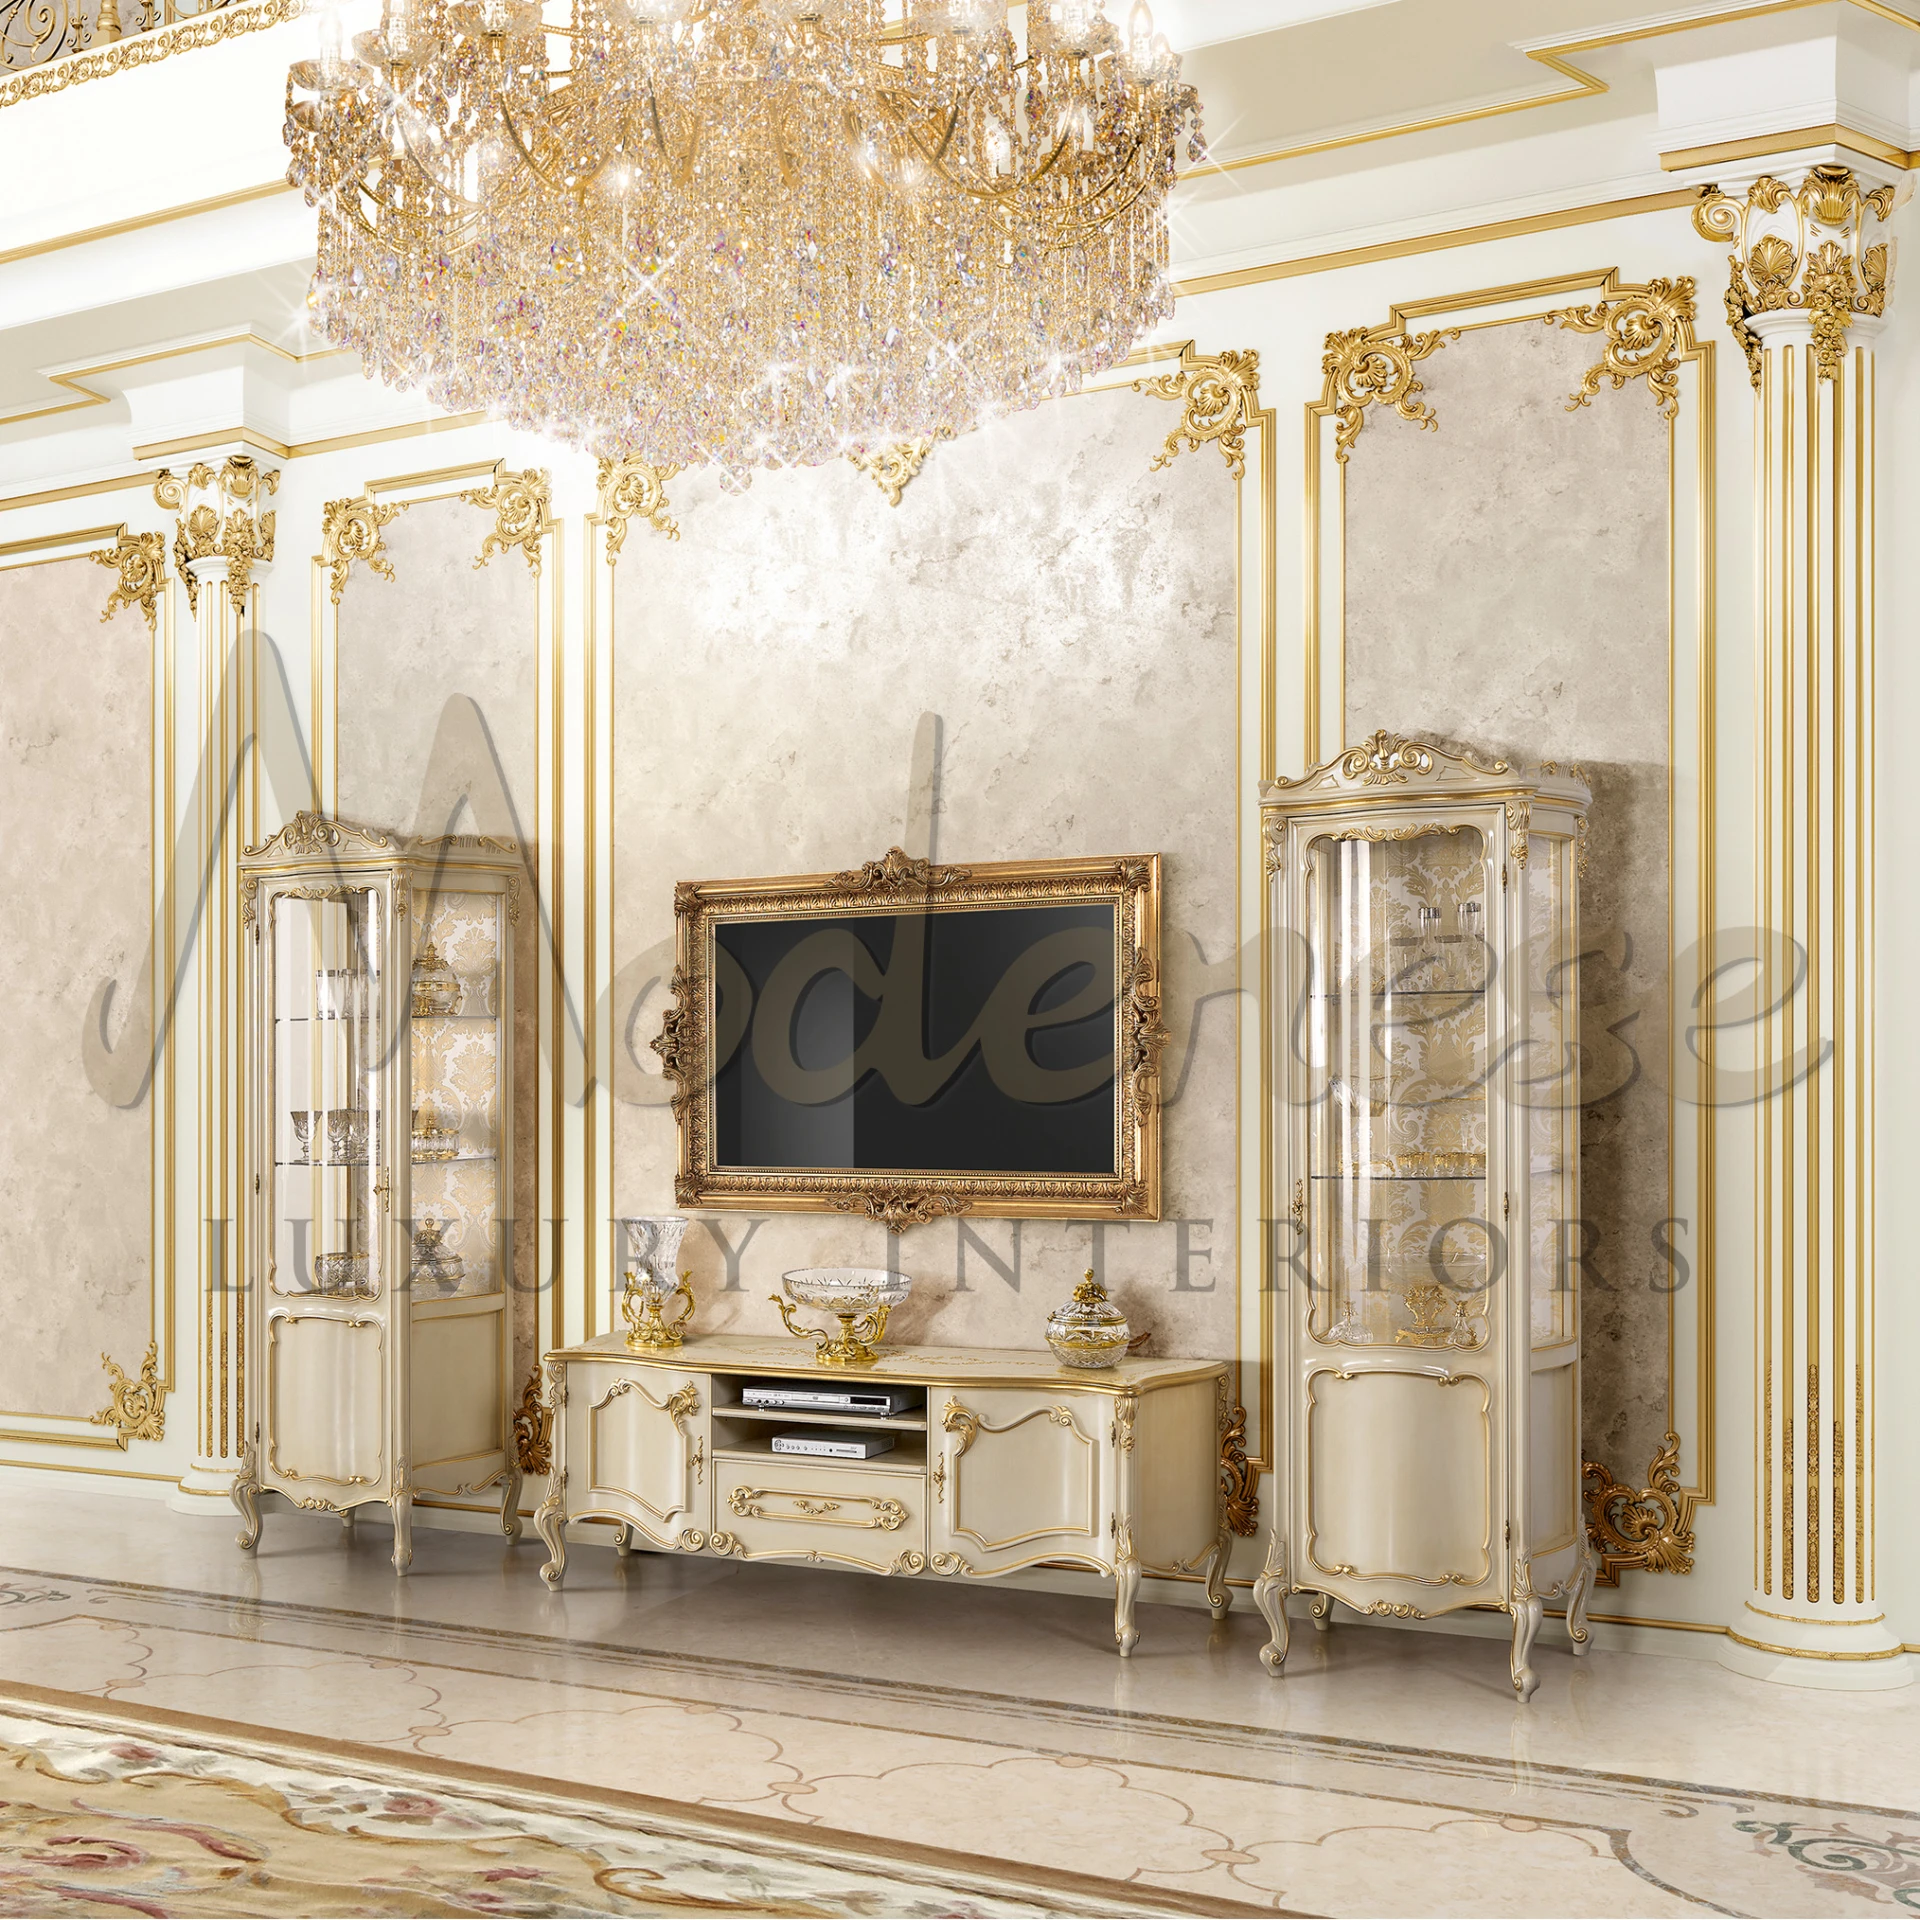 A luxurious room with cabinets and side table with golden details and a crystal chandelier.